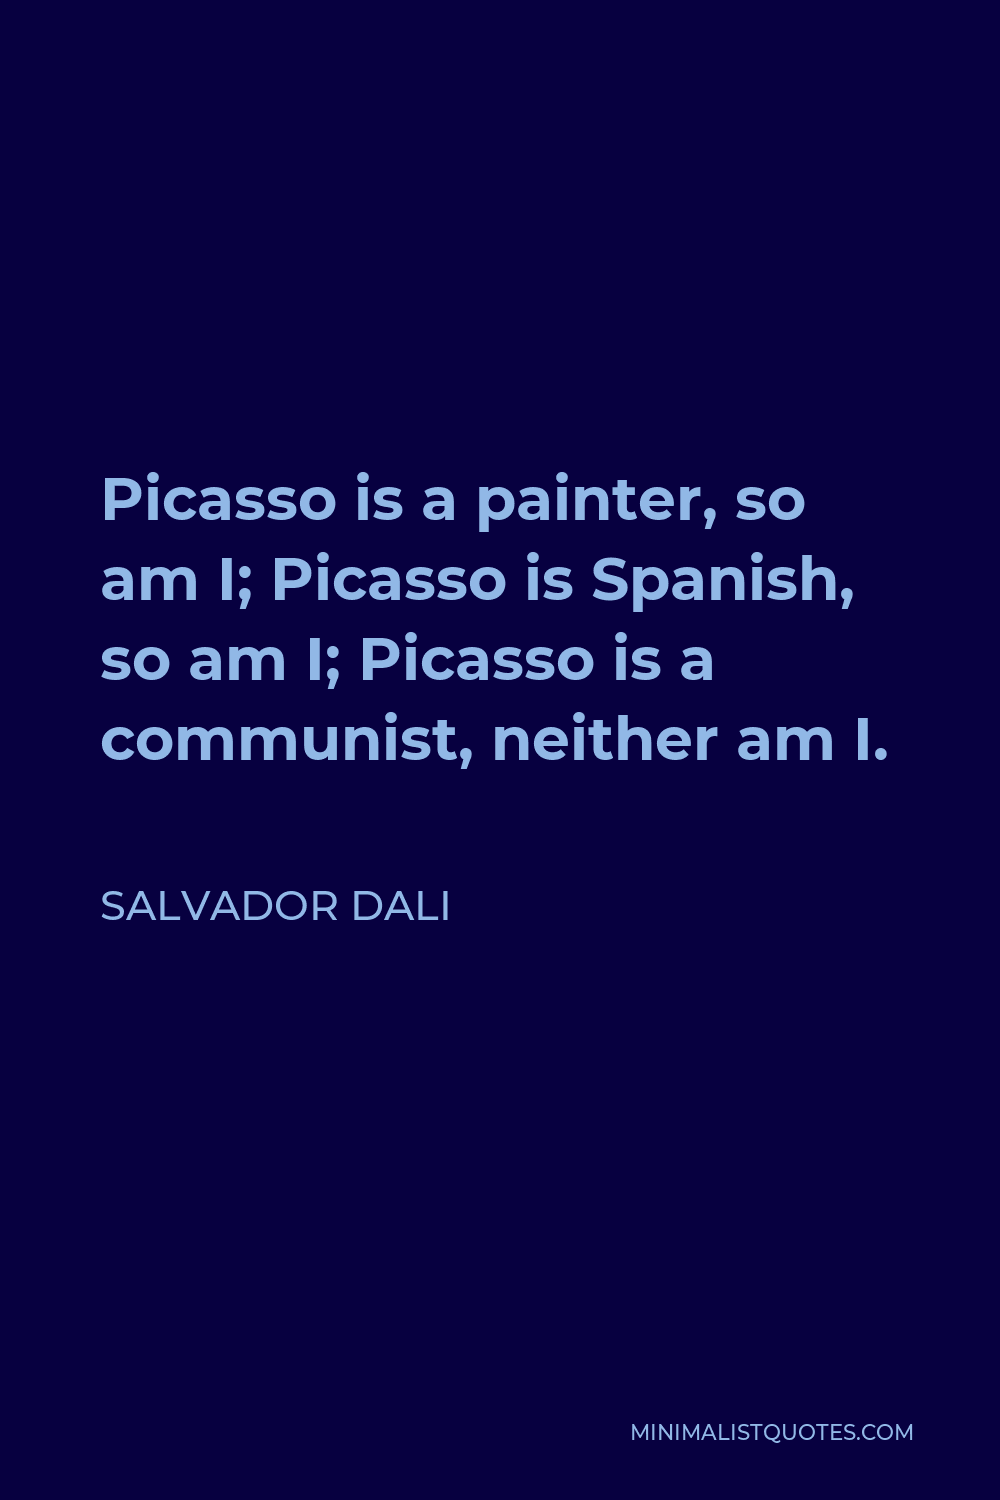 Salvador Dali Quote - Picasso is a painter, so am I; Picasso is Spanish, so am I; Picasso is a communist, neither am I.